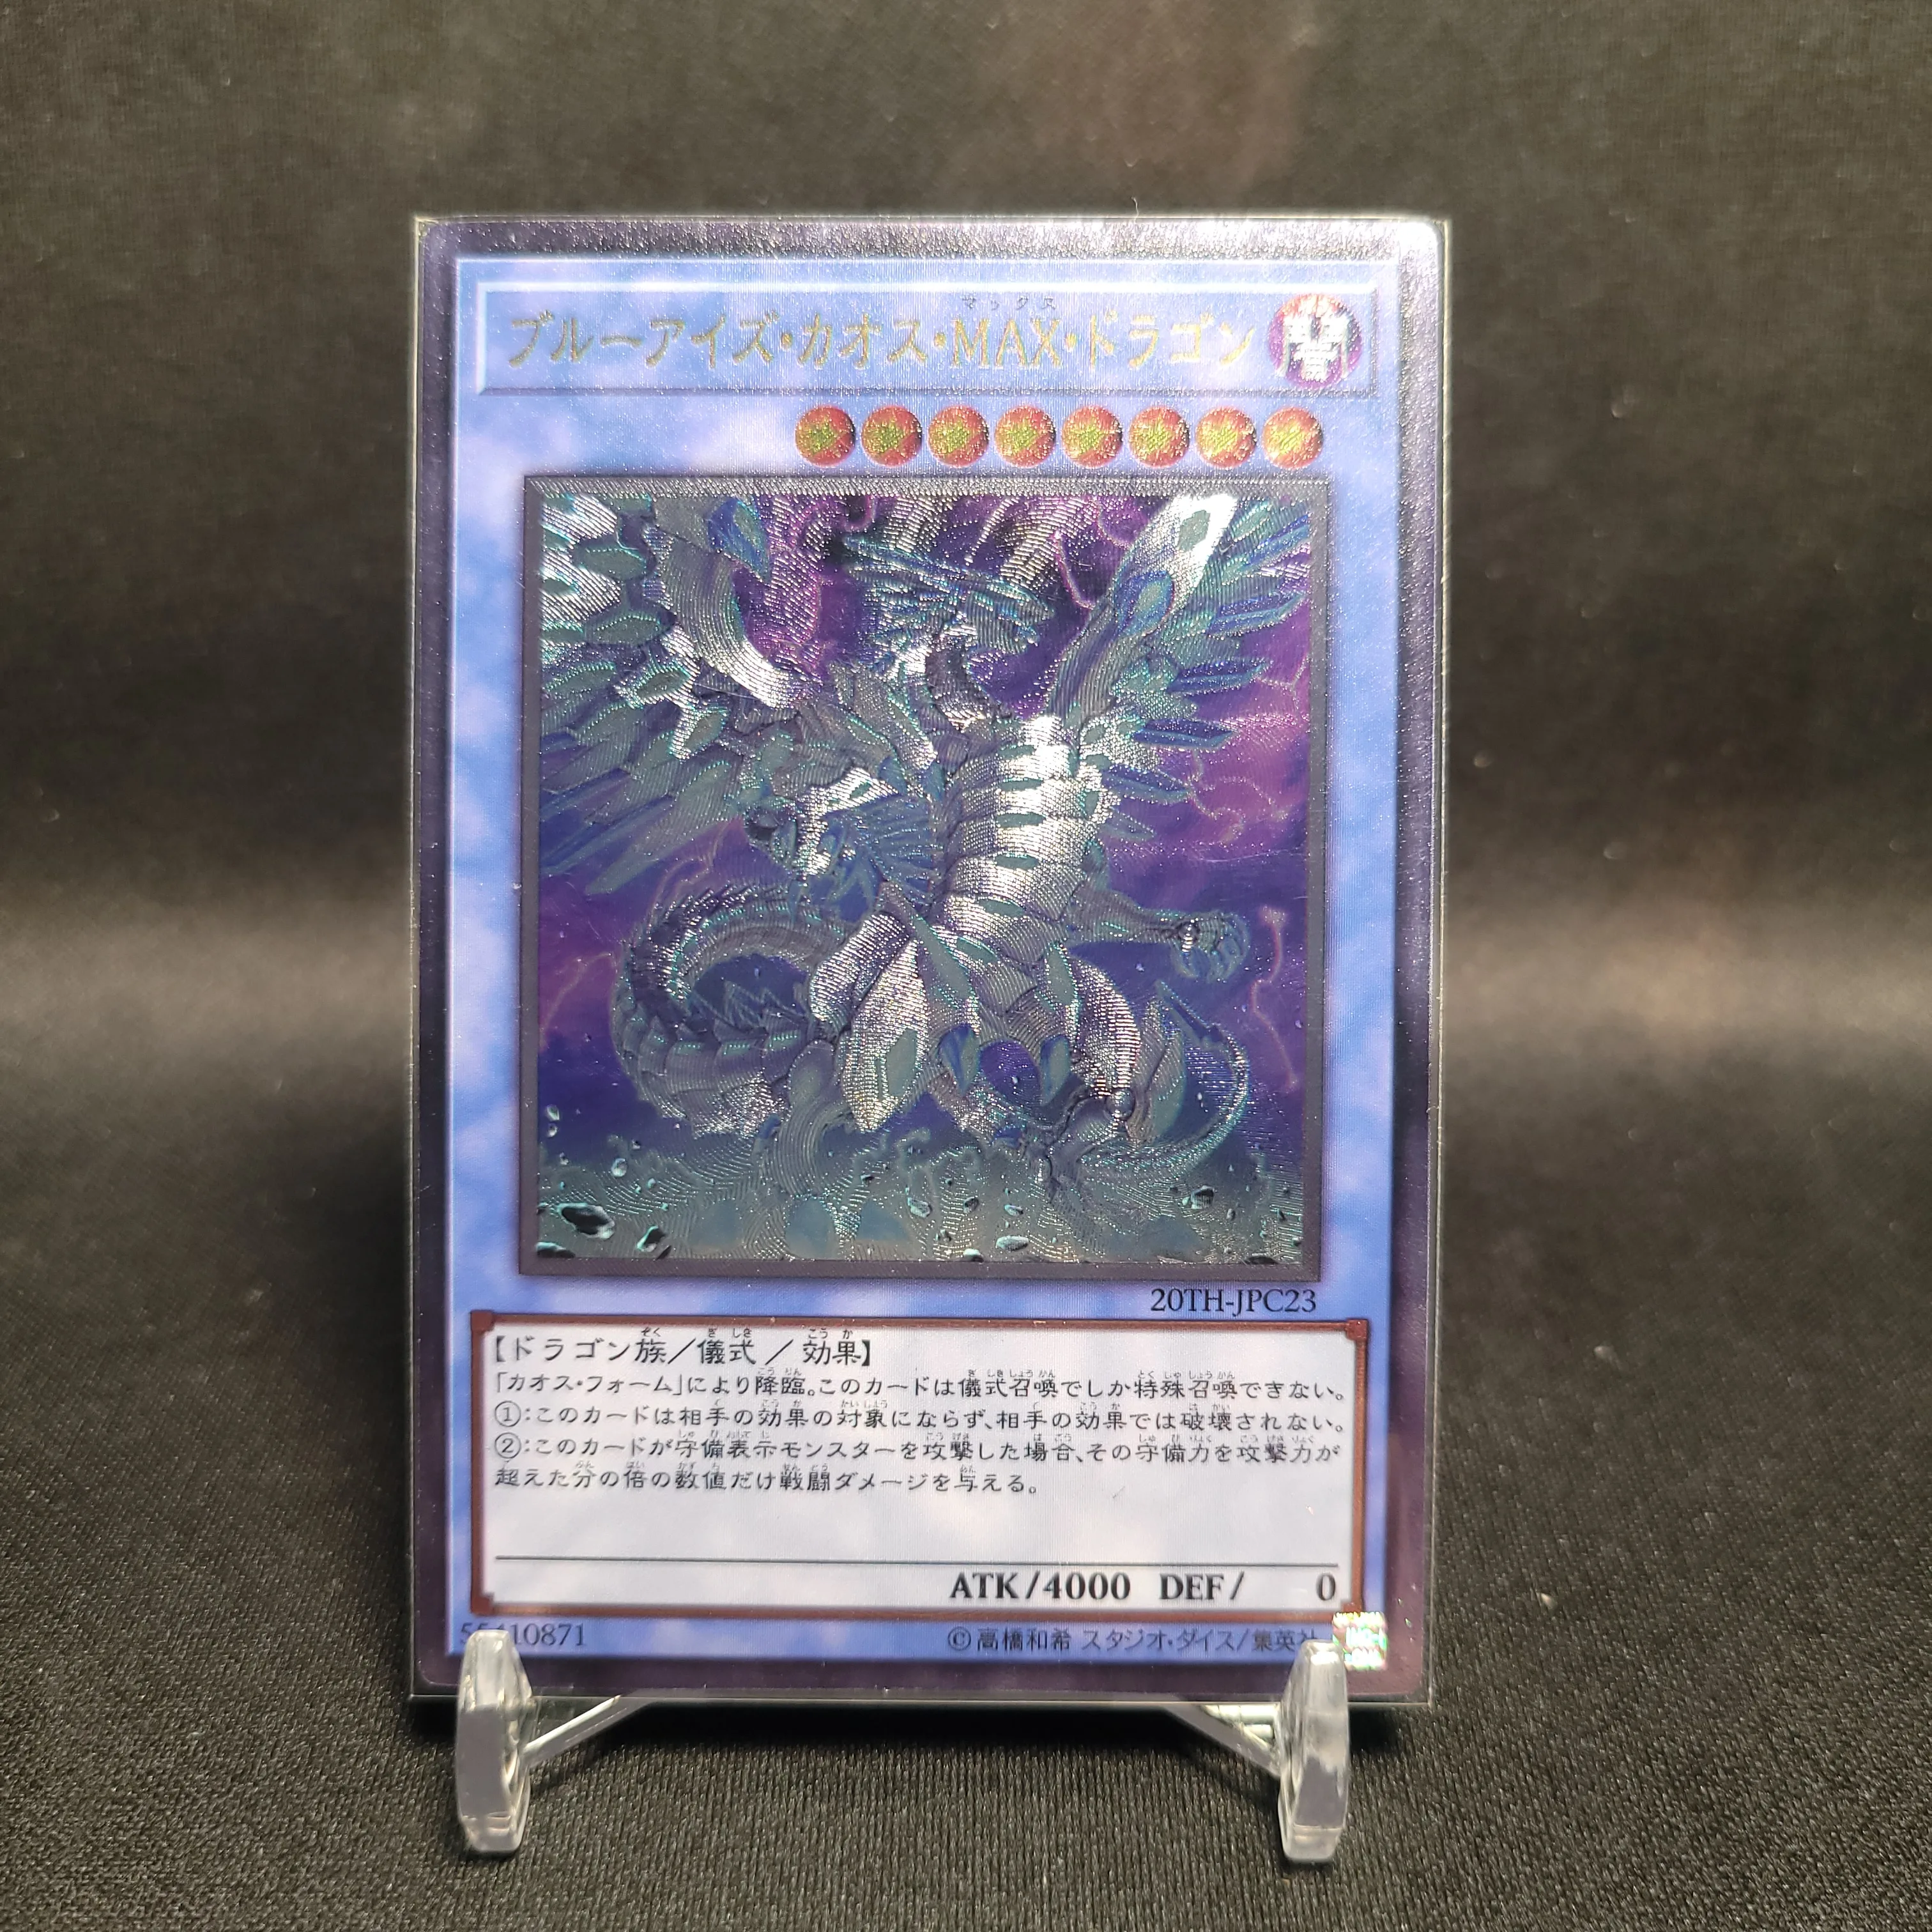 

Yu-Gi-Oh Ultimate Rare 20TH-JPC23/ Blue-Eyes Chaos MAX Dragon Children's Gift Collectible Card Toys (Not Original)